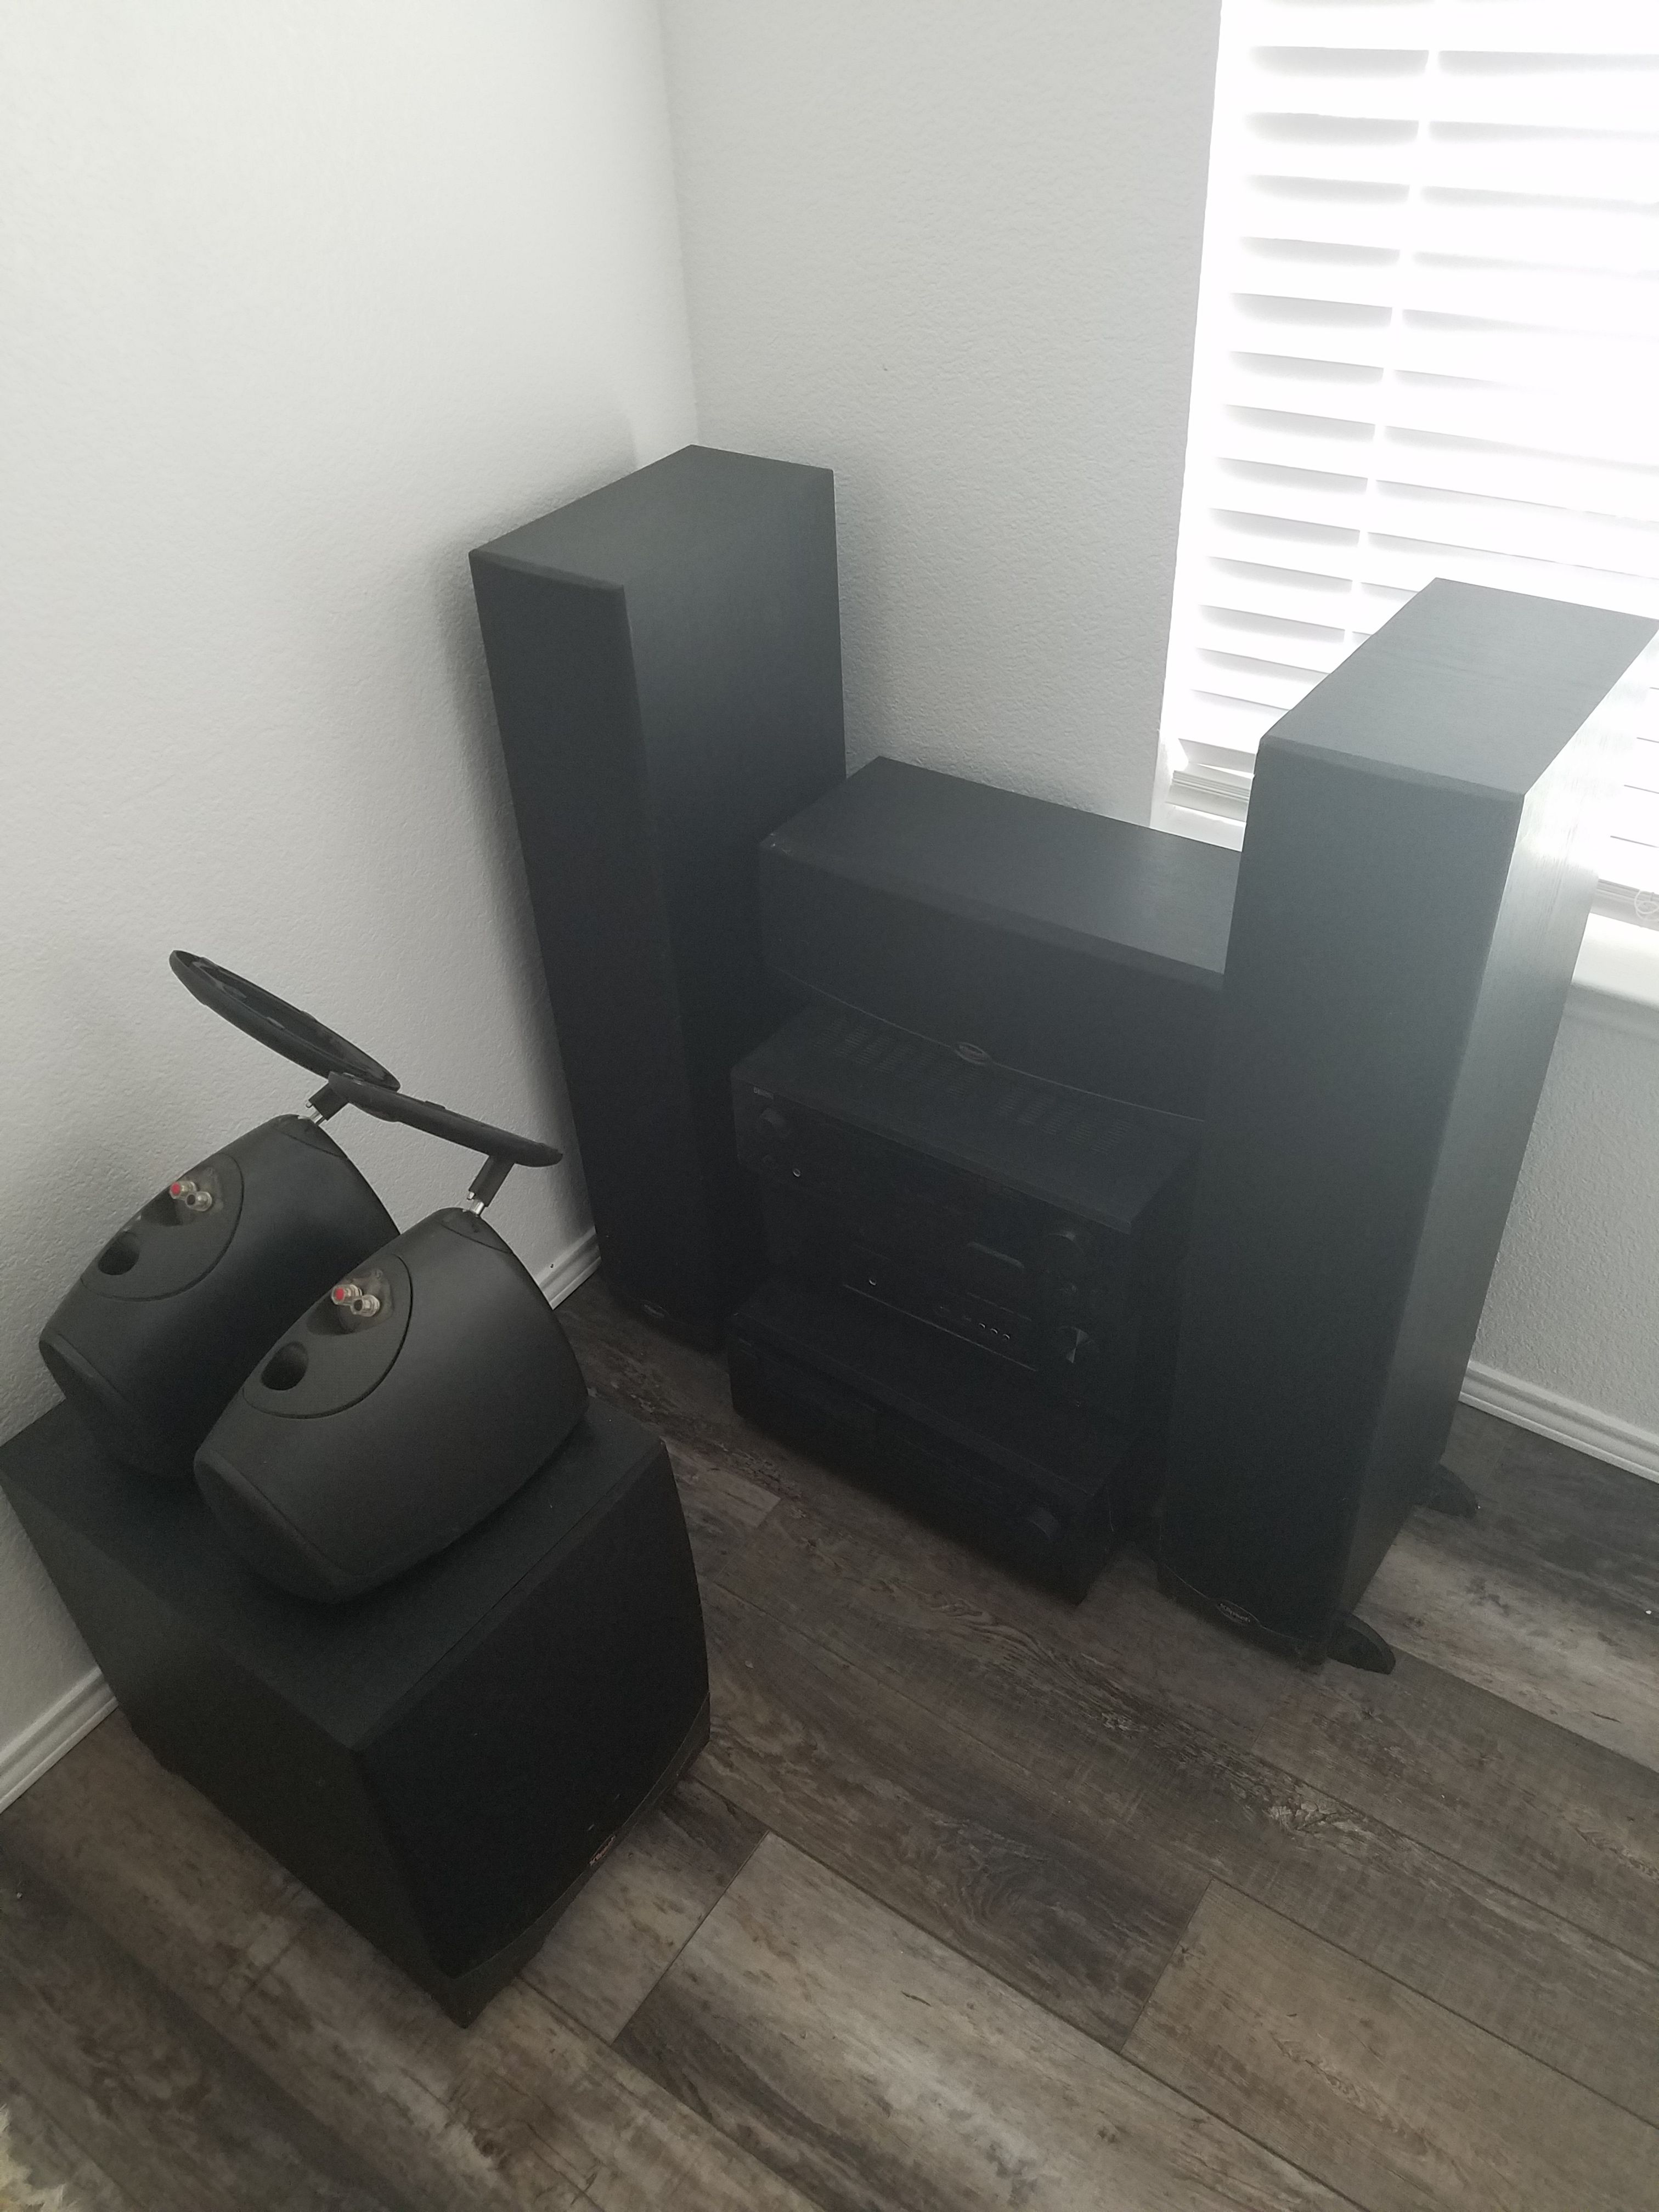 Klipsch speakers with Denon and Yamaha receivers